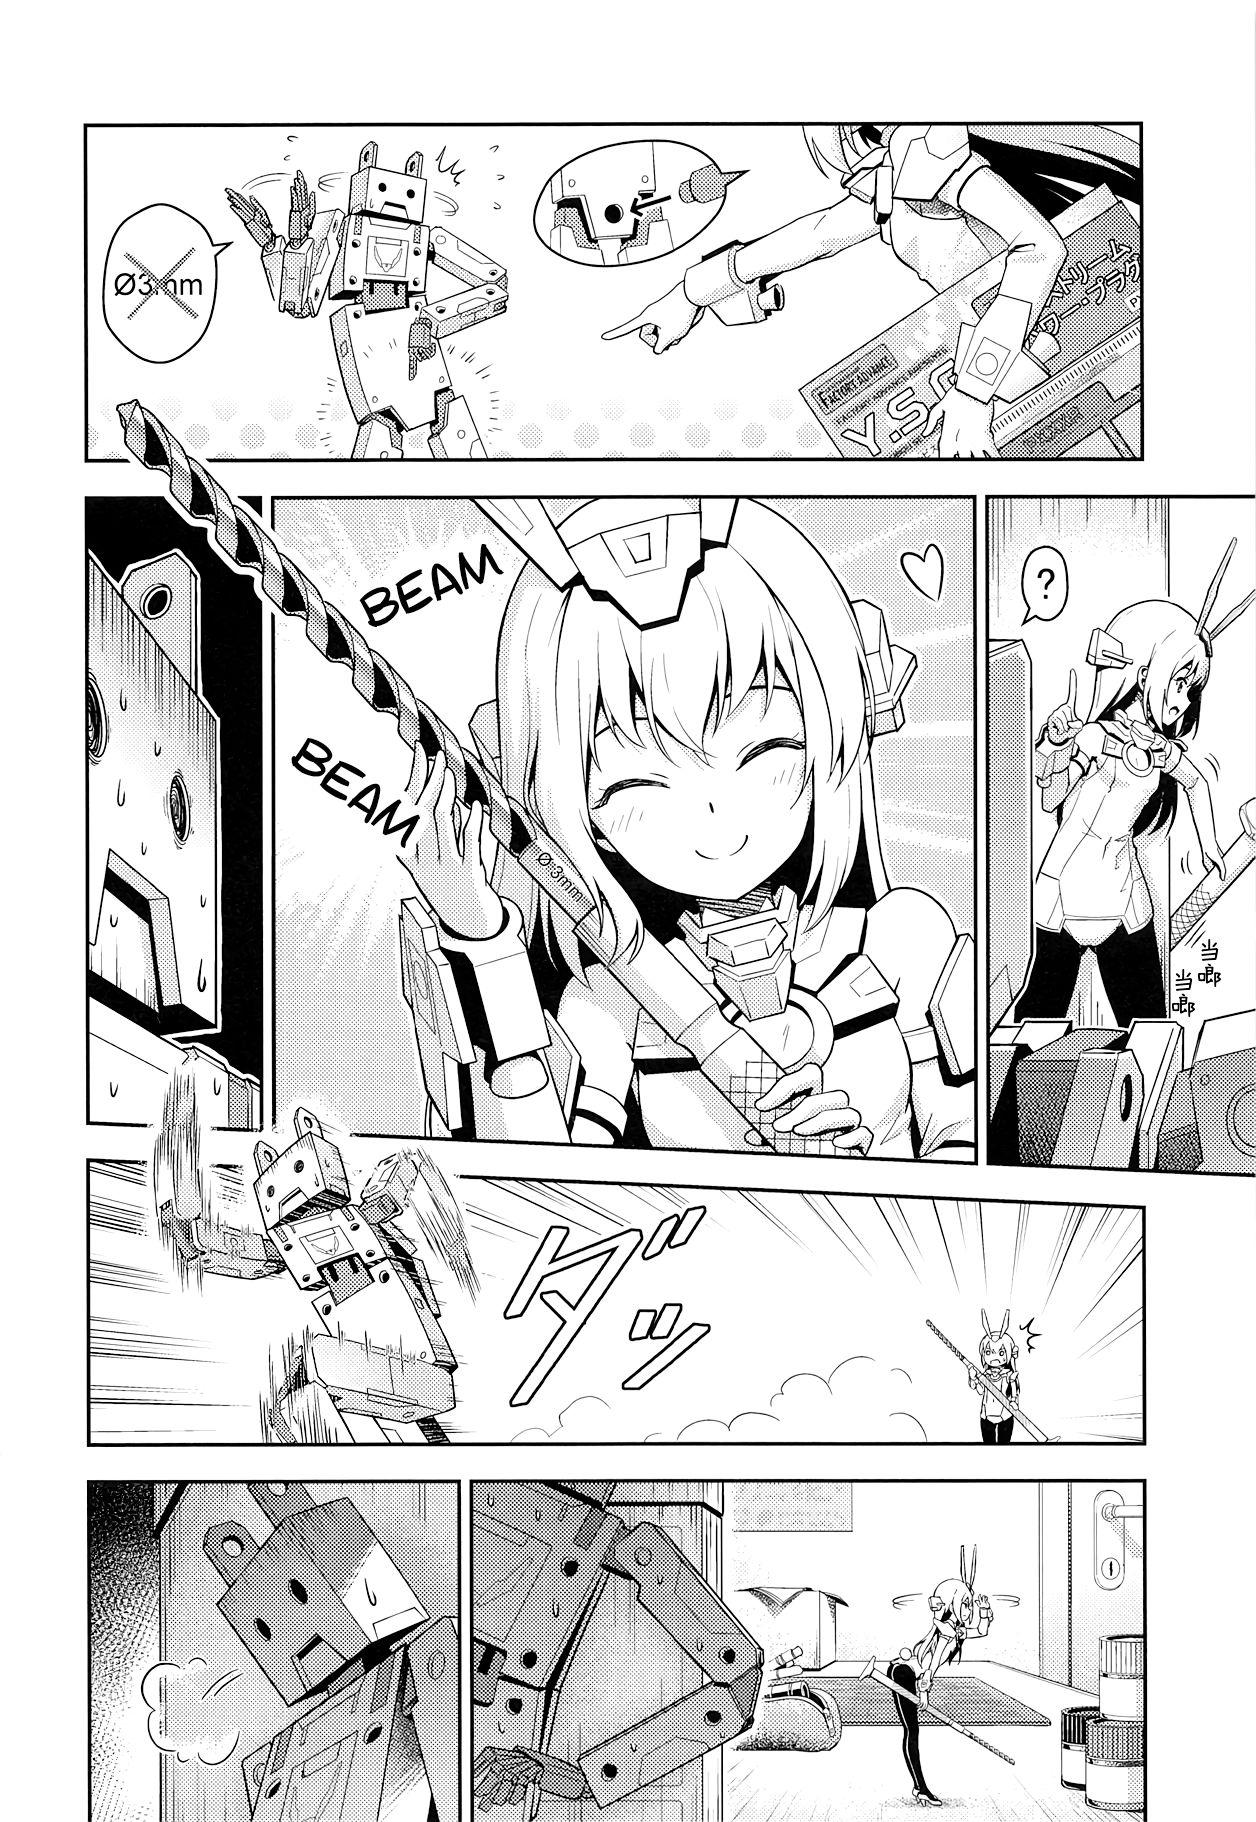 Anale Base, Juuden Shitai! - Frame arms girl Huge Ass - Page 5